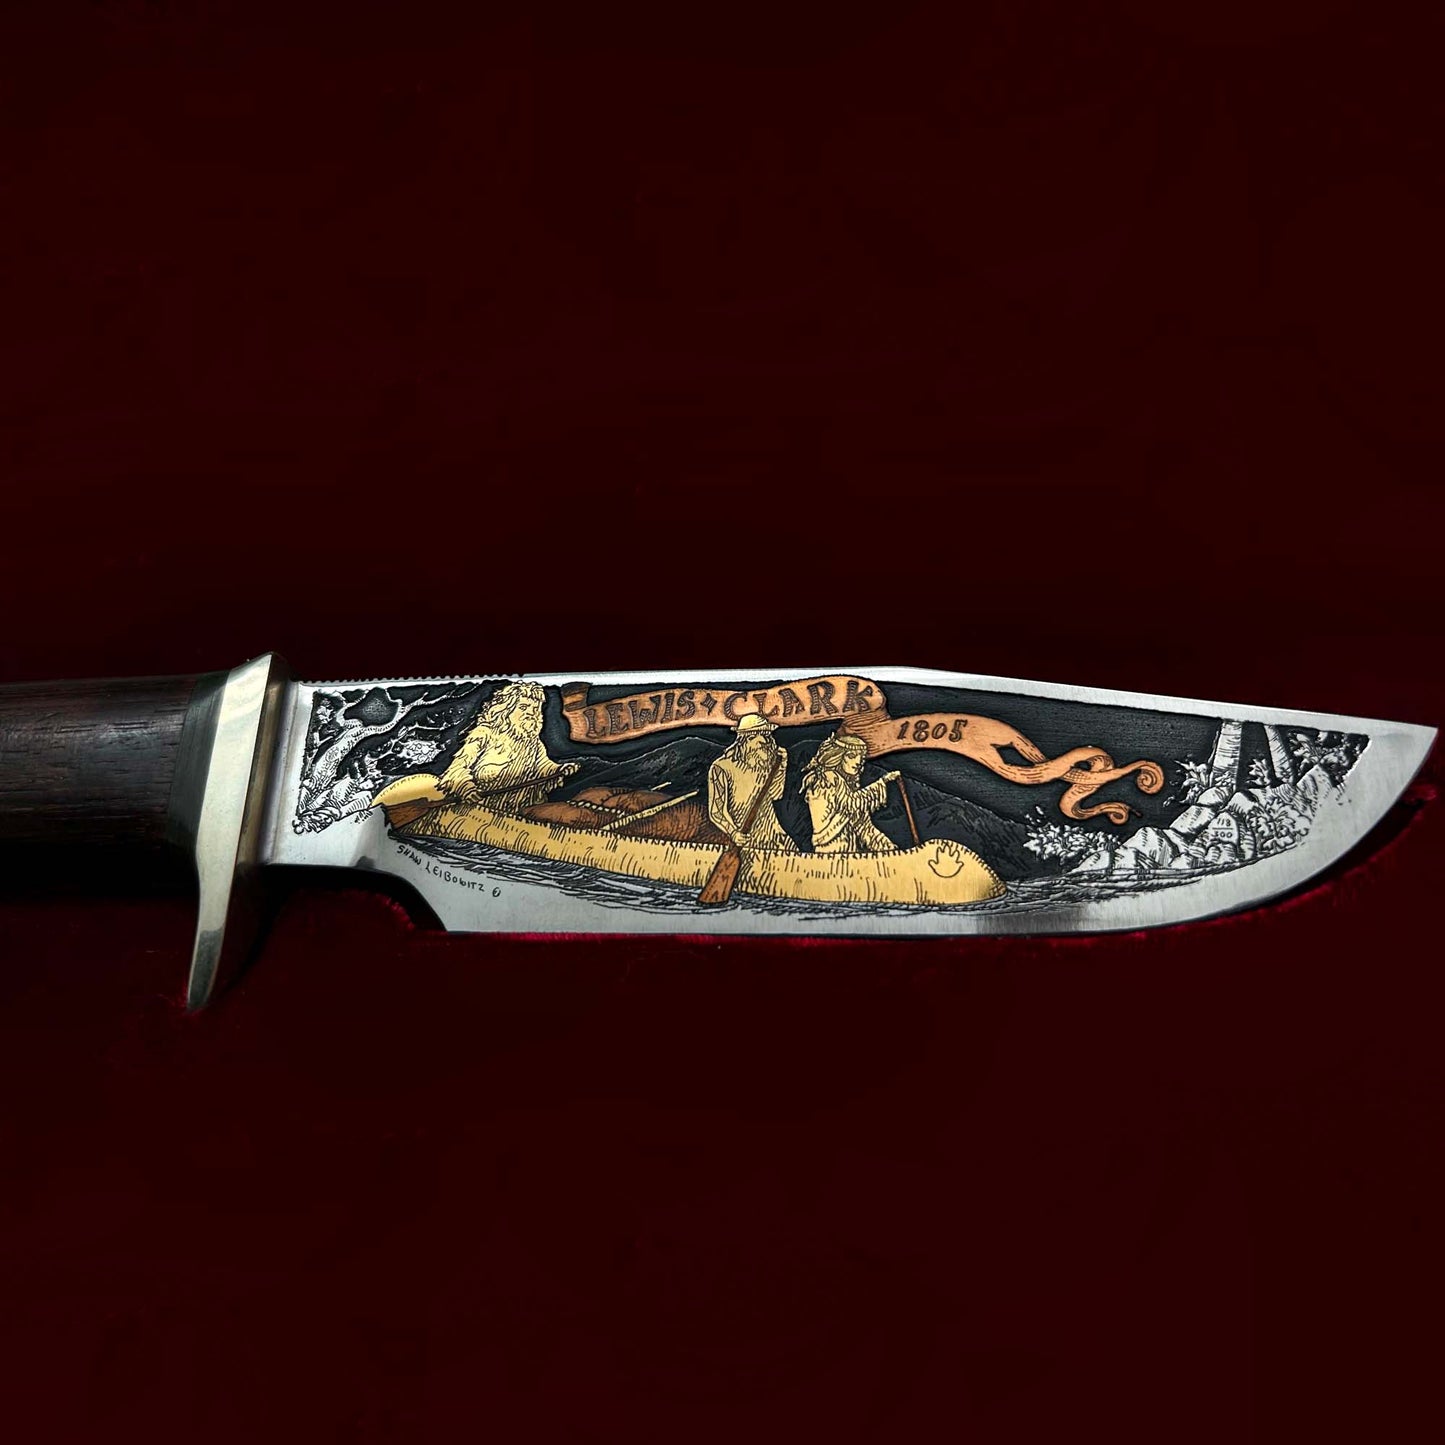 Lewis and Clark Randall Knife Details